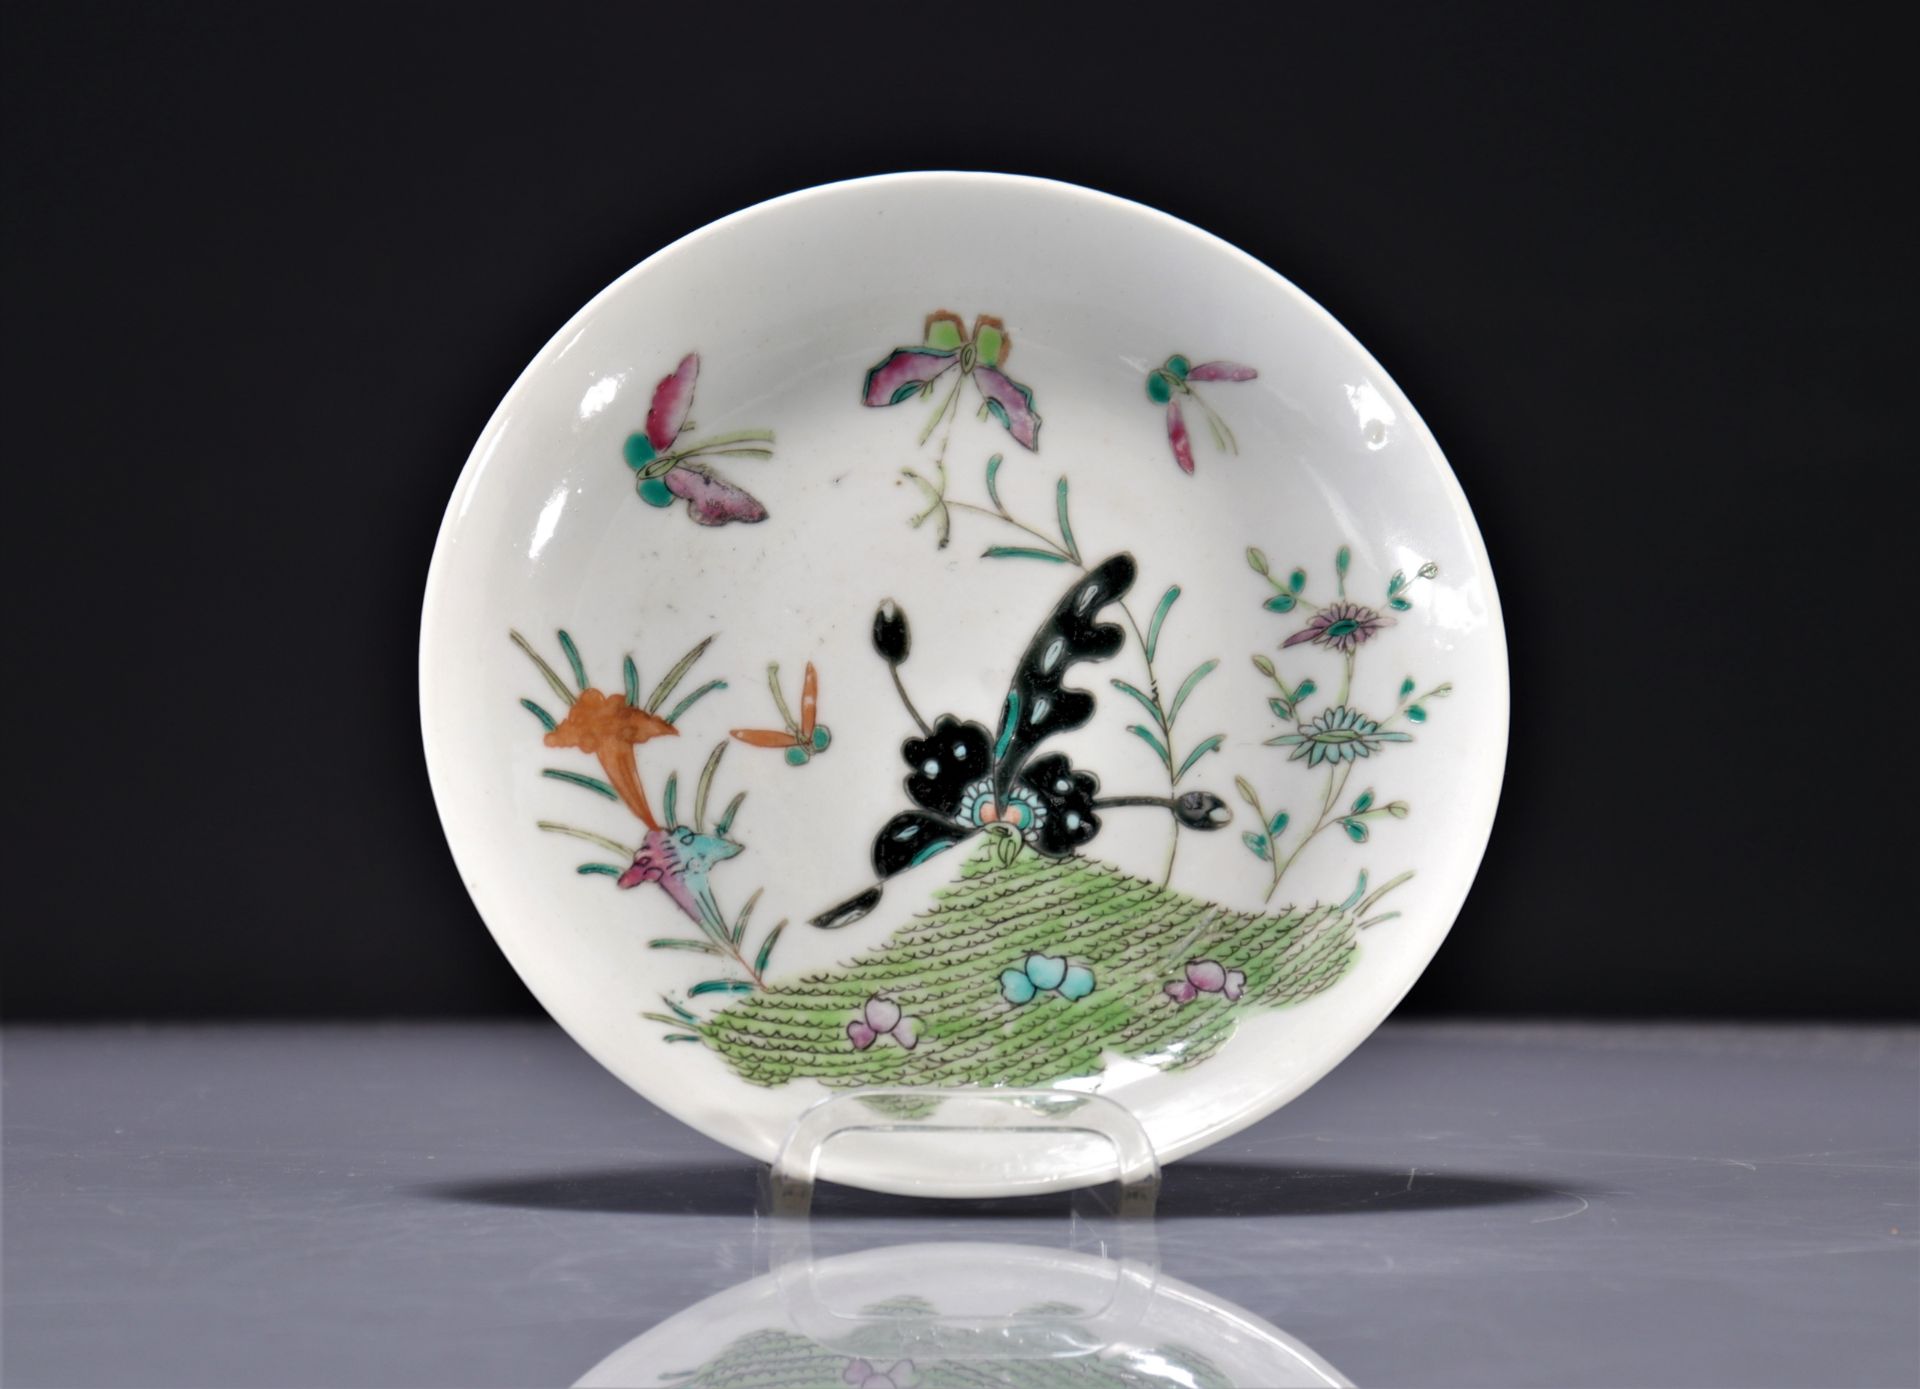 Chinese porcelain plate with tobacco flower decor